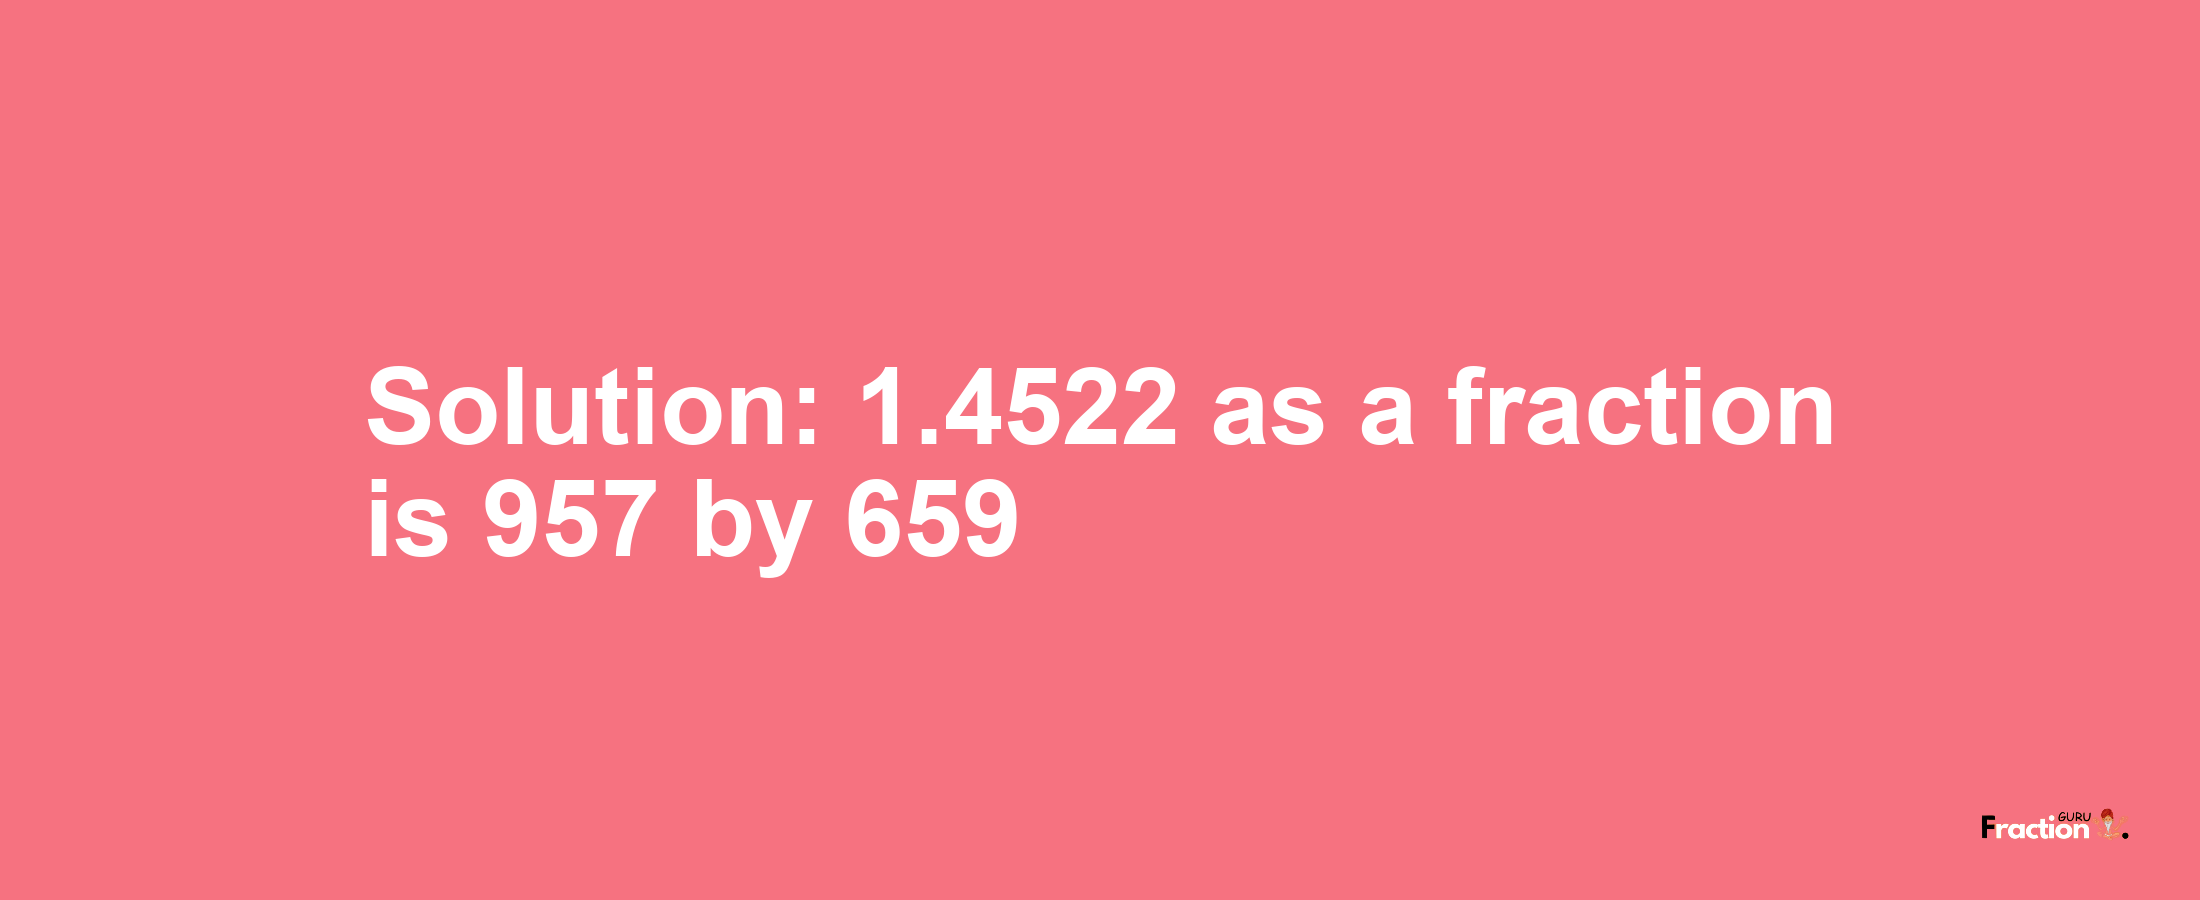 Solution:1.4522 as a fraction is 957/659